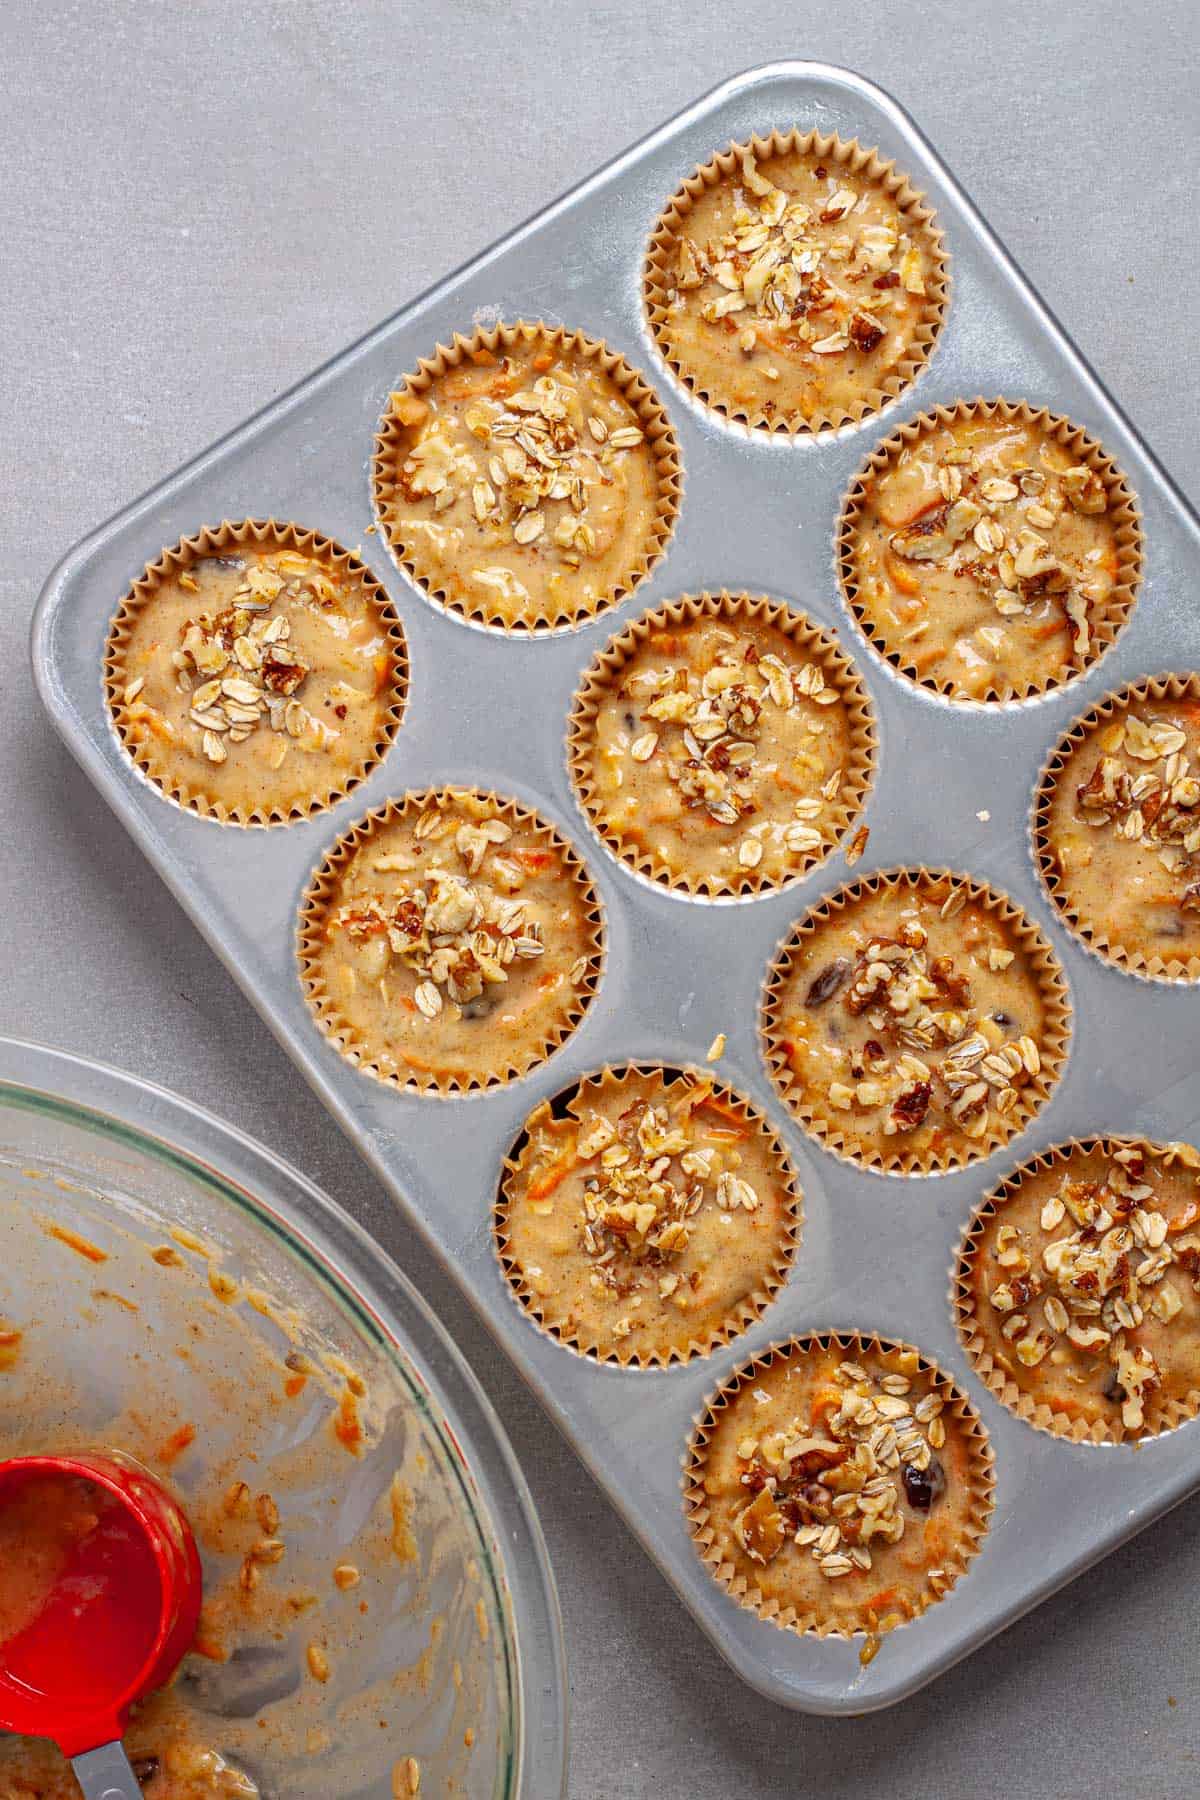 Banana and carrot muffin batter in a muffin tin topped with oats and walnuts.